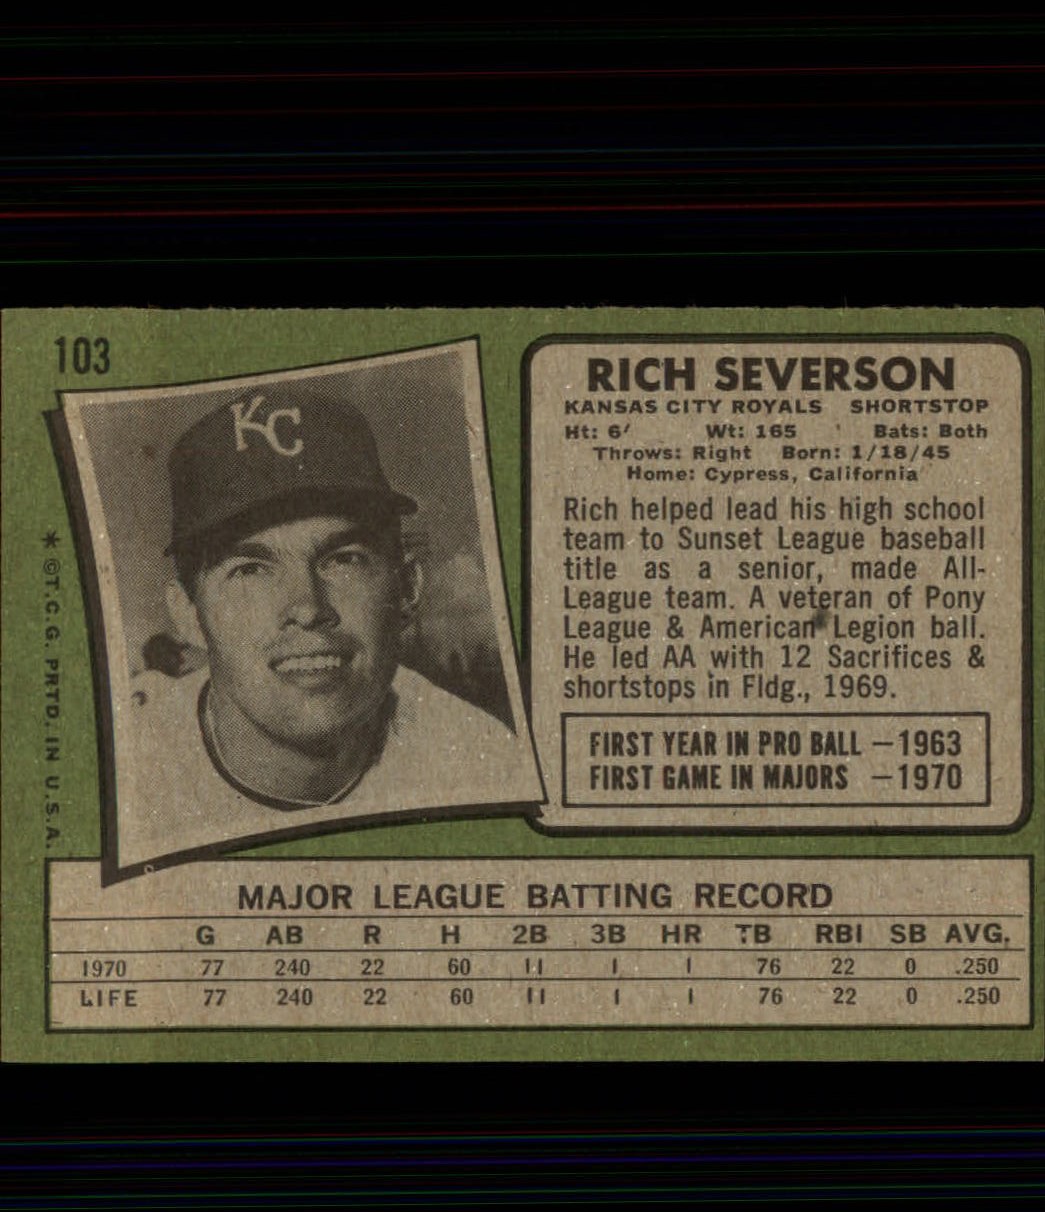 1971 Topps #103 Rich Severson RC back image